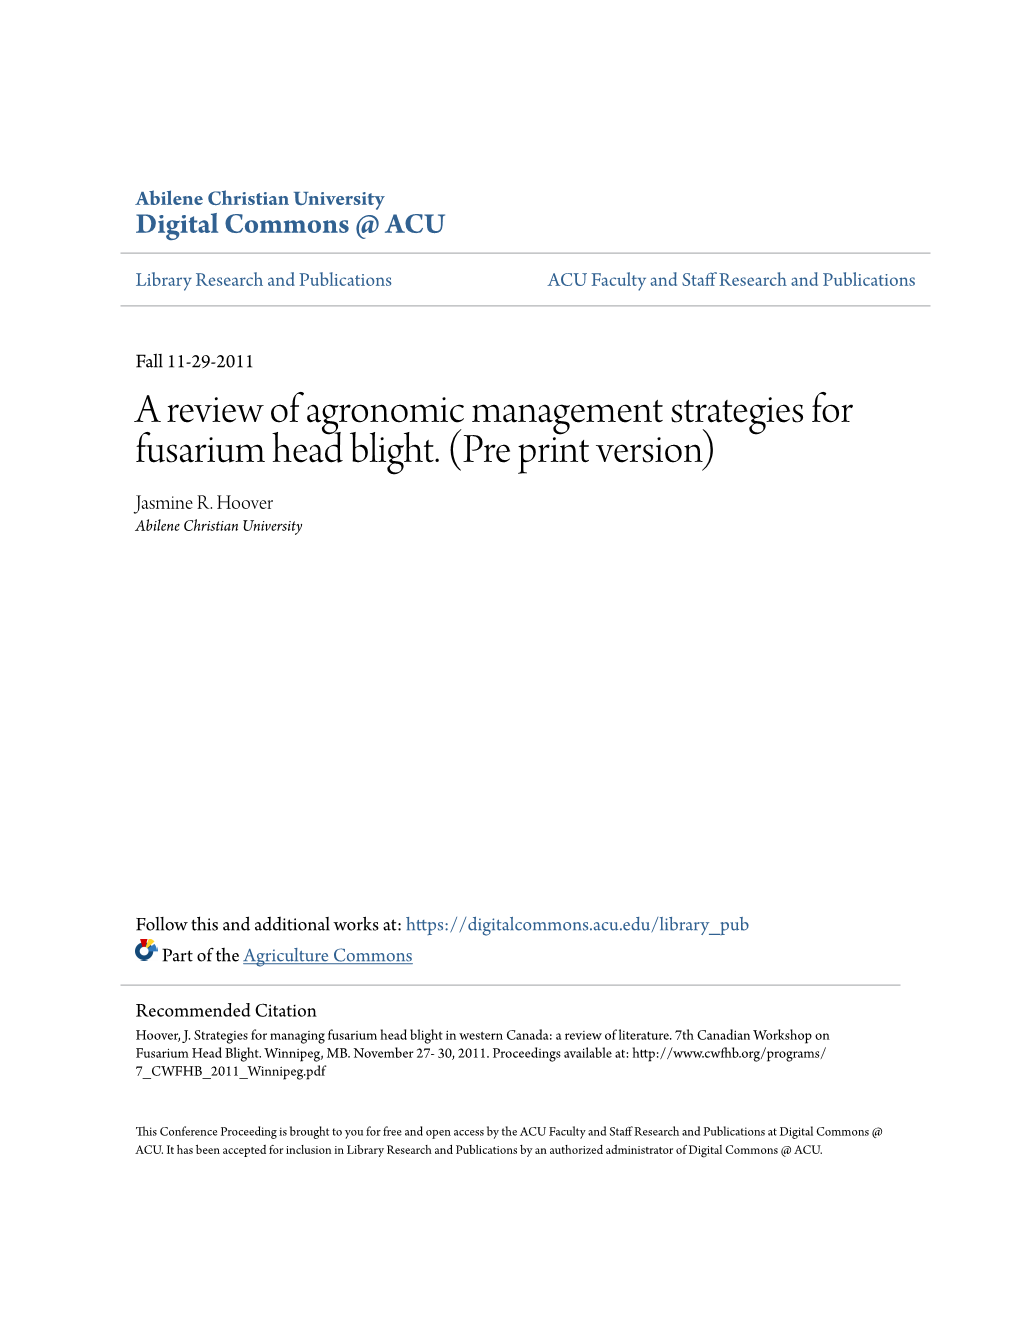 A Review of Agronomic Management Strategies for Fusarium Head Blight